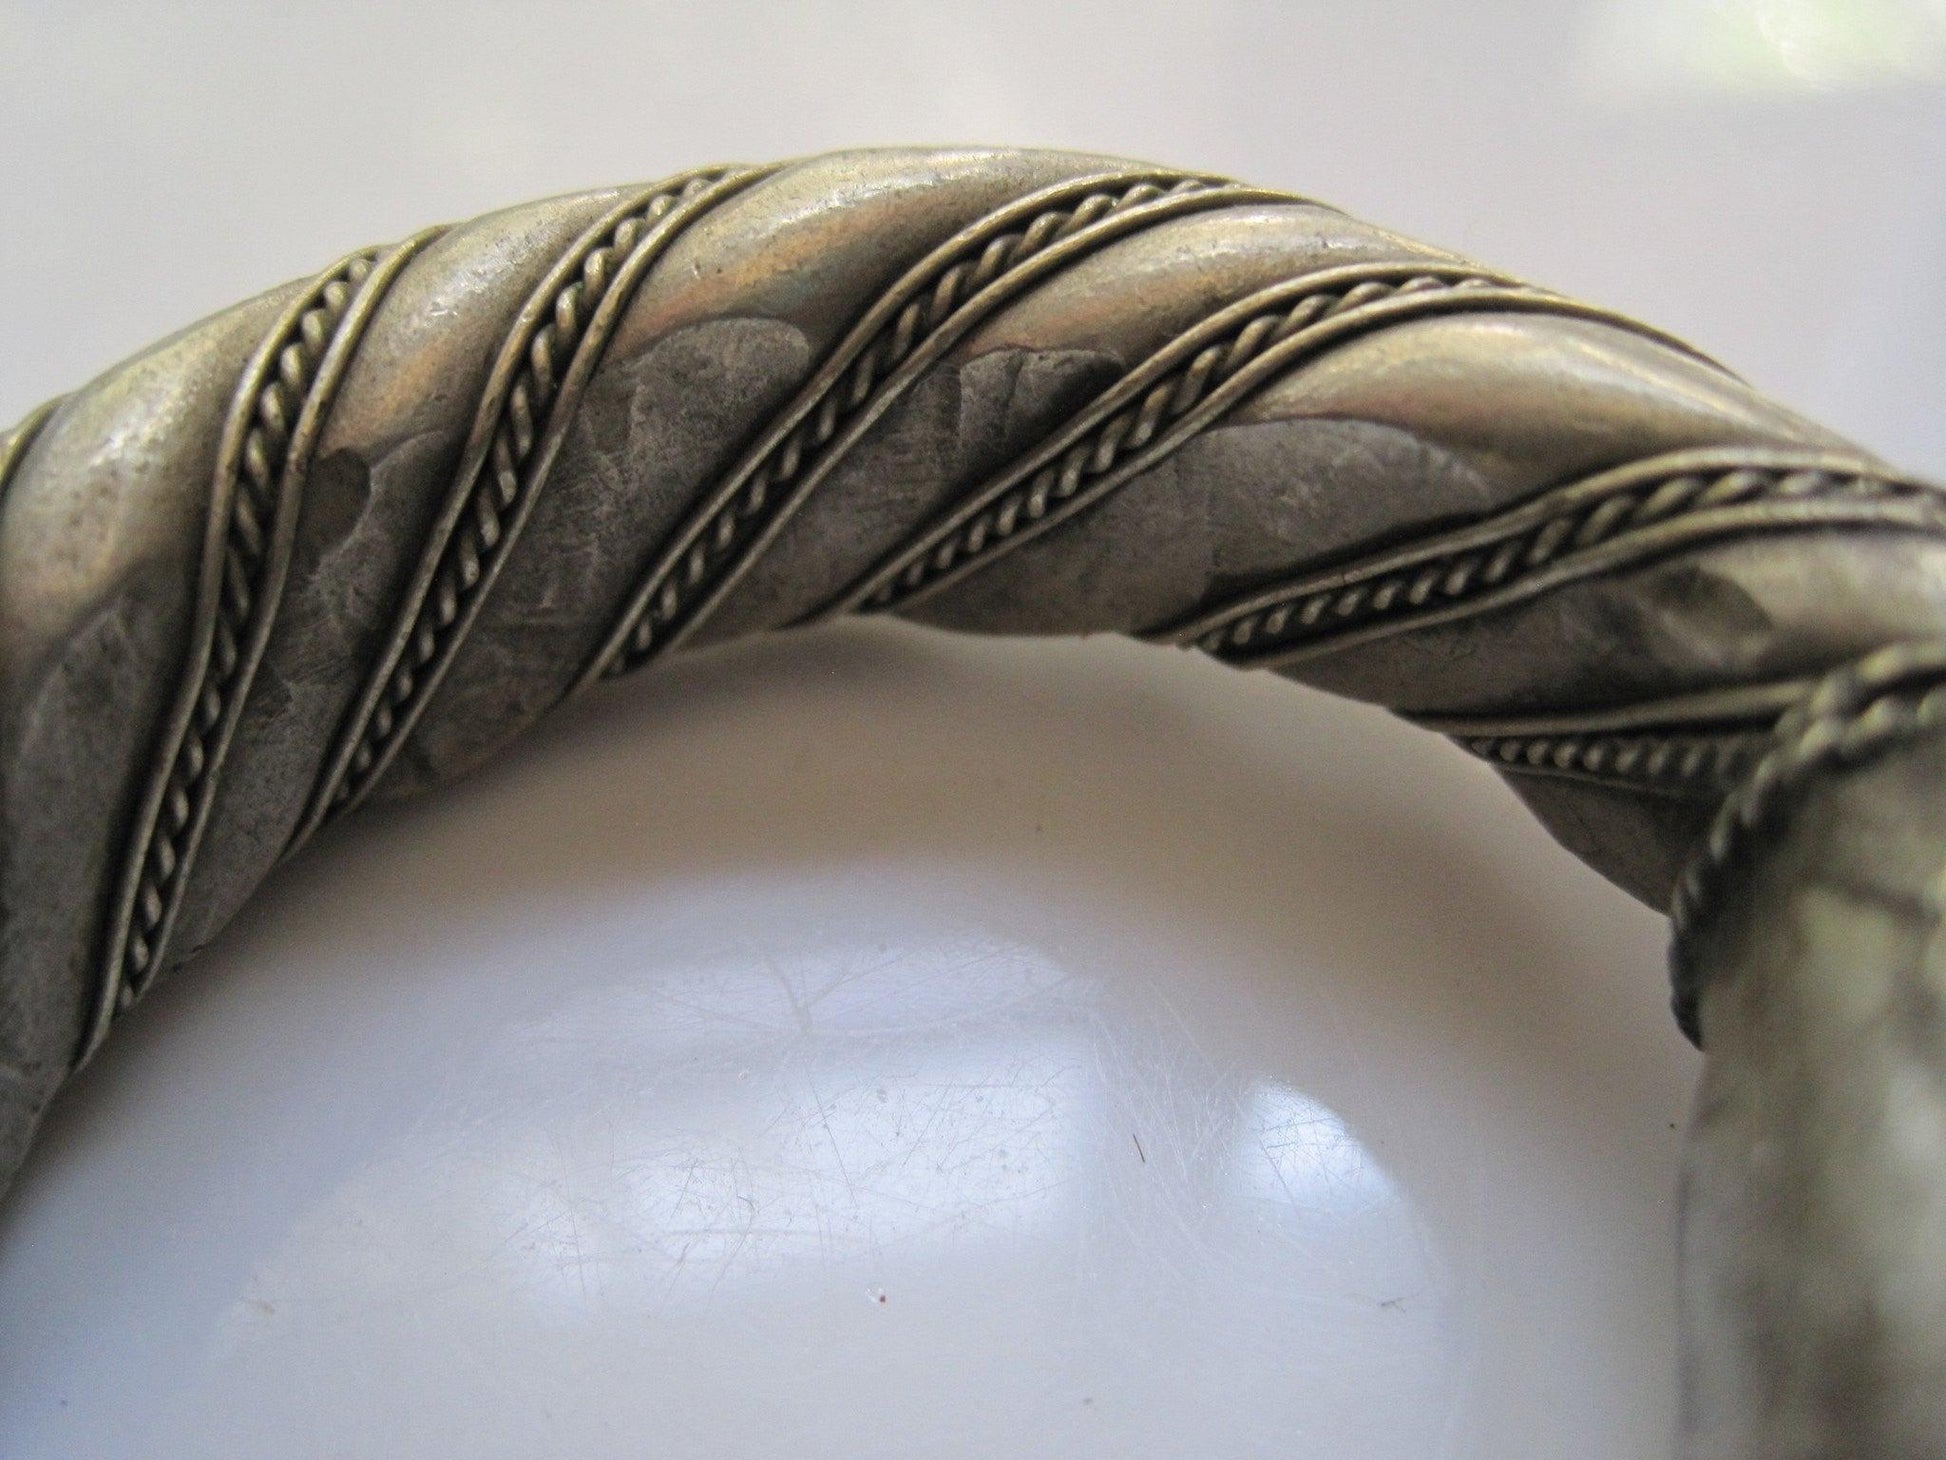 Antique Bedouin Twisted Rope Cuff Bracelet for Very Small Wrist - Anteeka